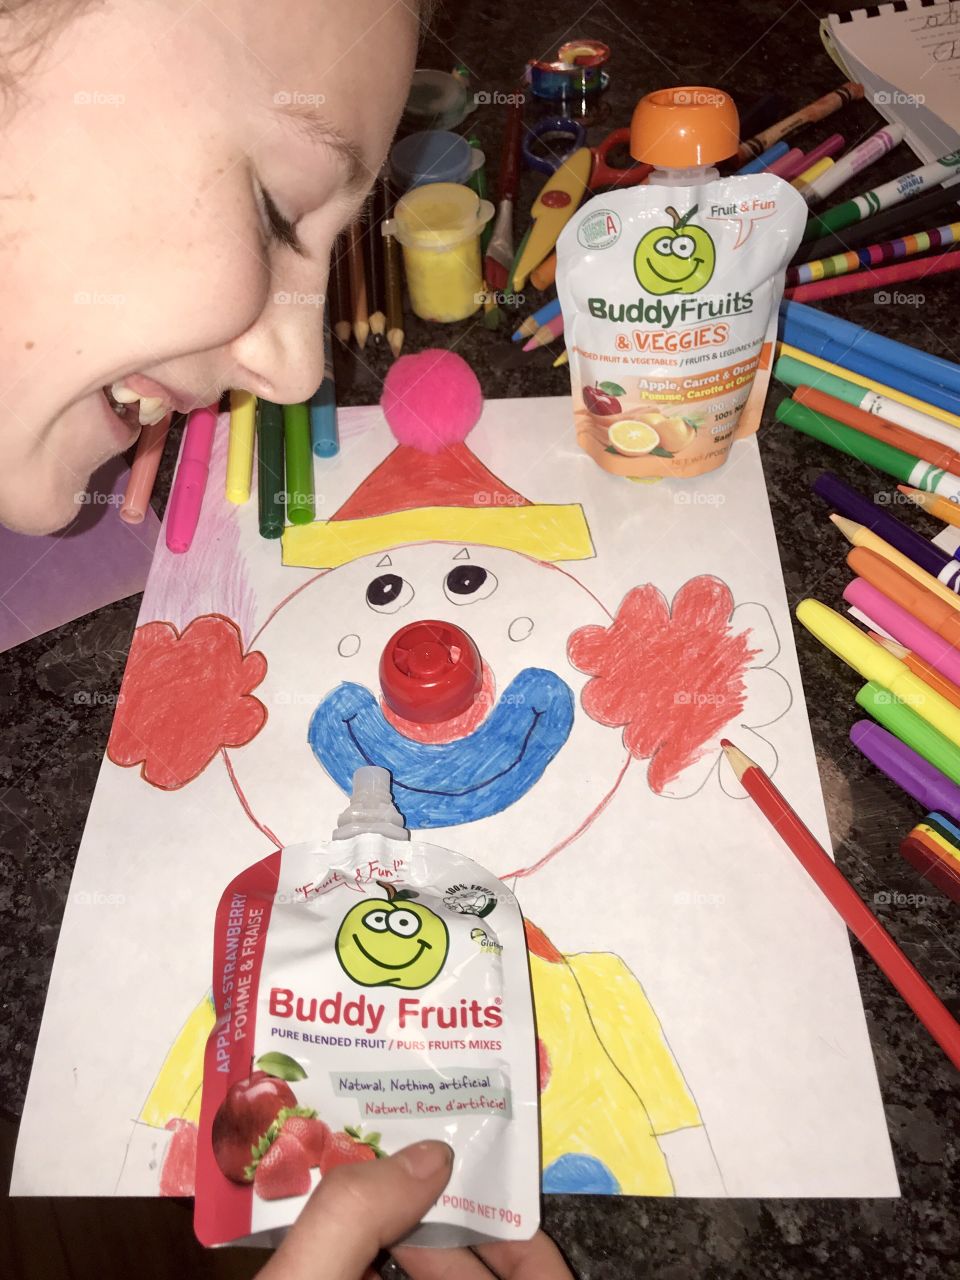 Acting like a clown with Buddy Fruits